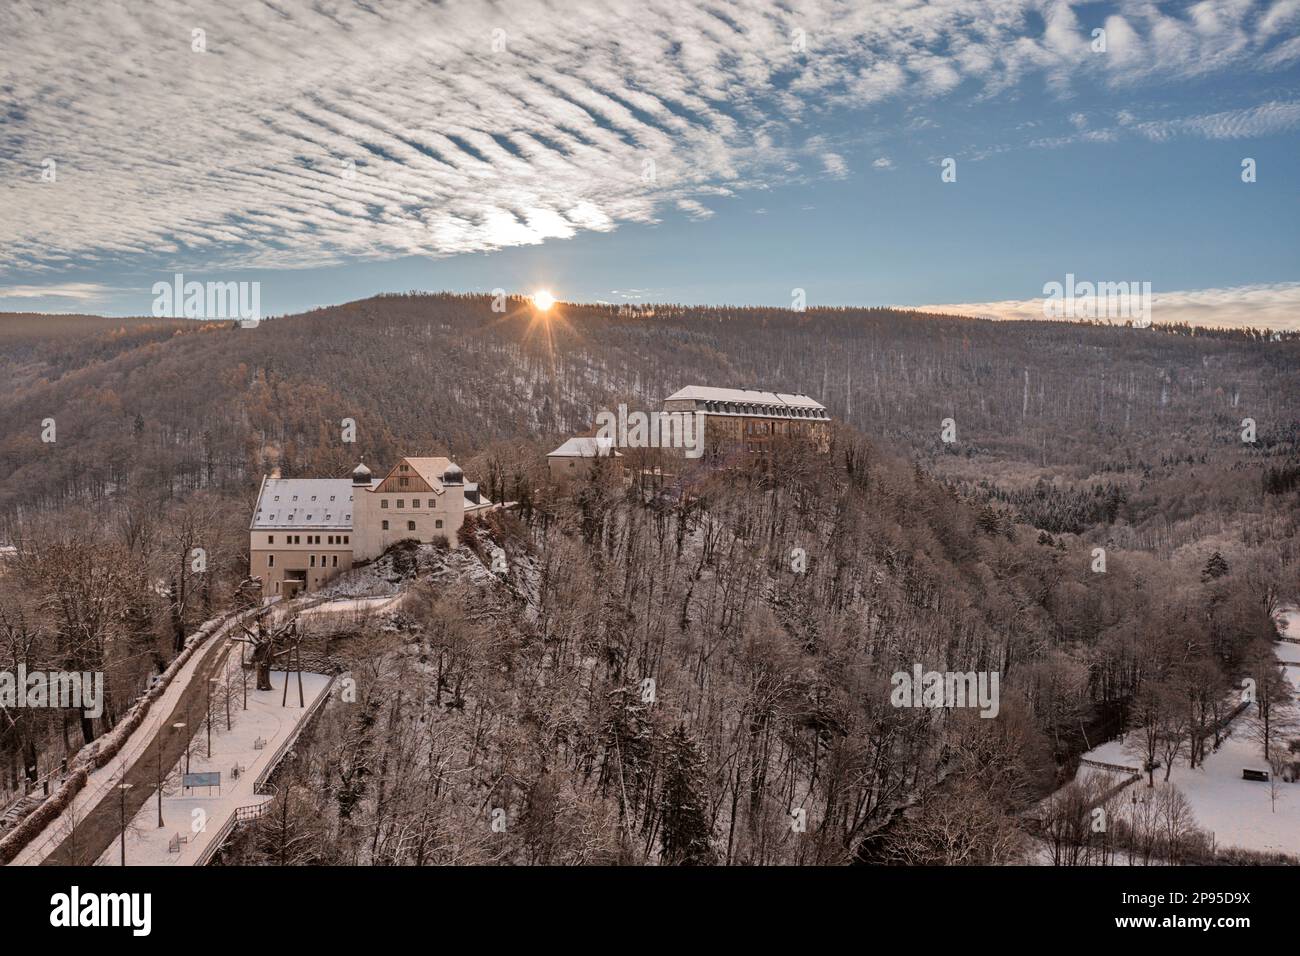 Germany, Thuringia, Schwarzburg, baroque castle, armory, road, river, forest, mountains, sunrise, snow, overview, back light Stock Photo